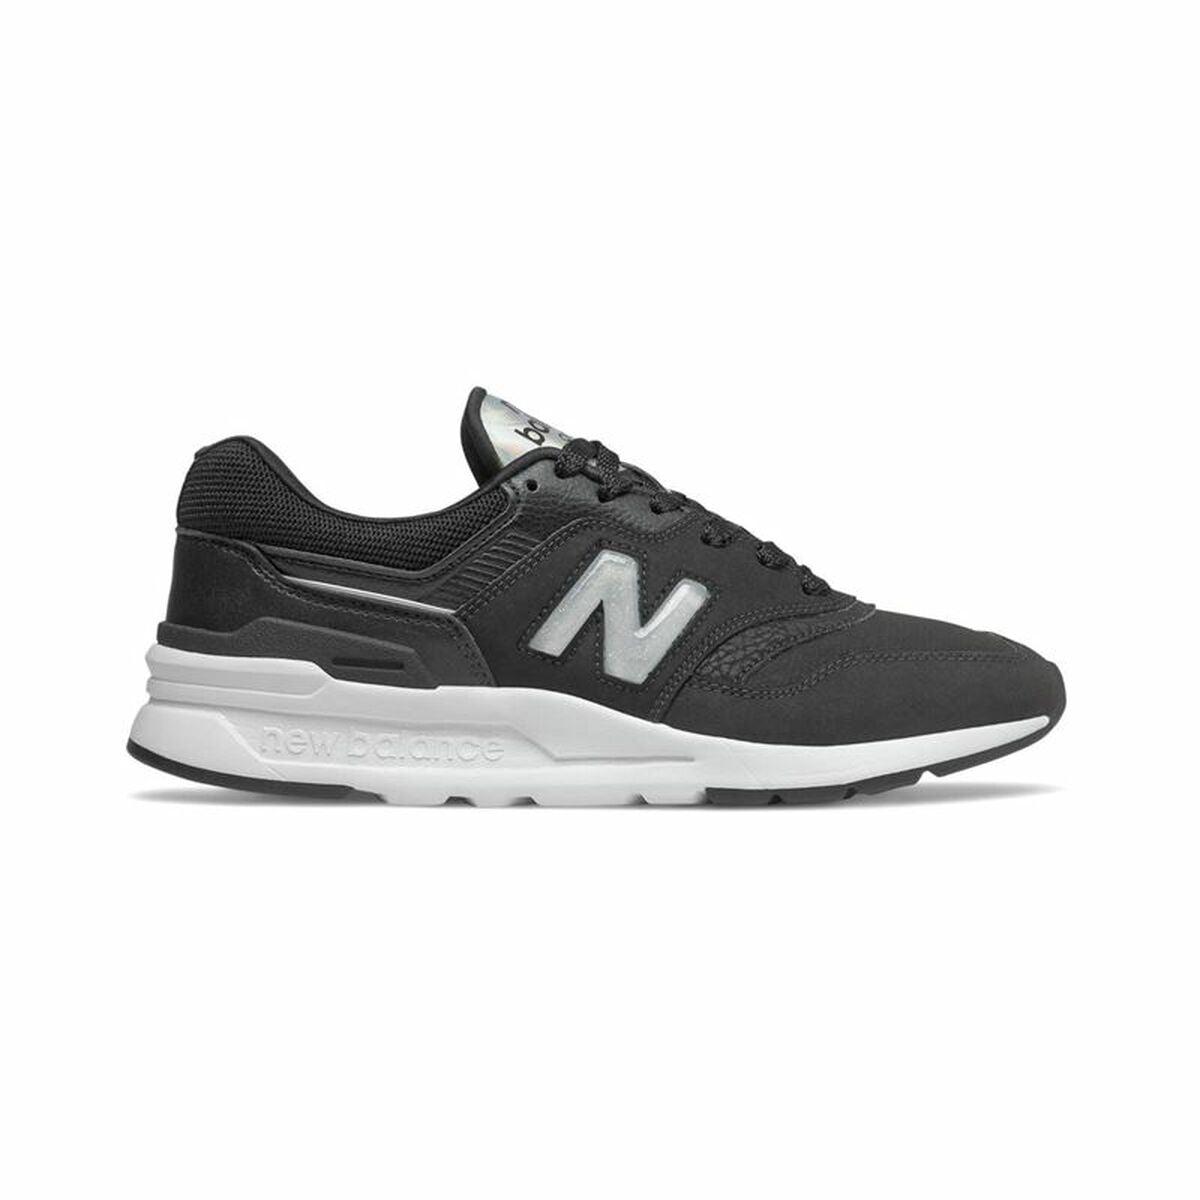 New Balance Sports Trainers For Women 997 Lady Lyst